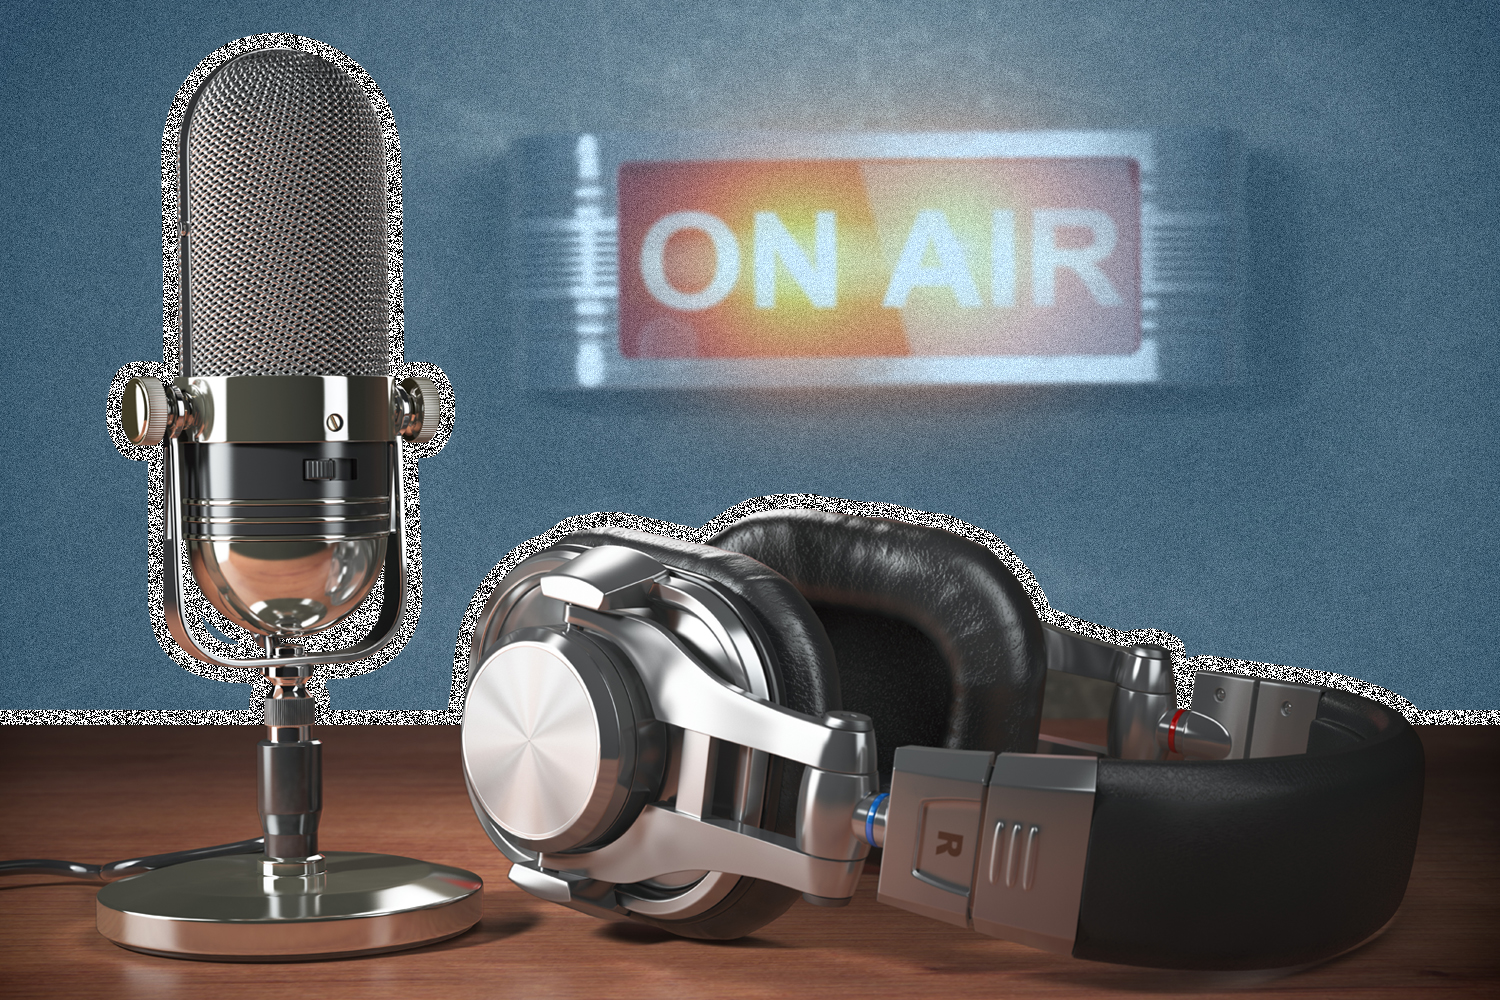 Image of headphones and microphone on table in front of an "on air" sign